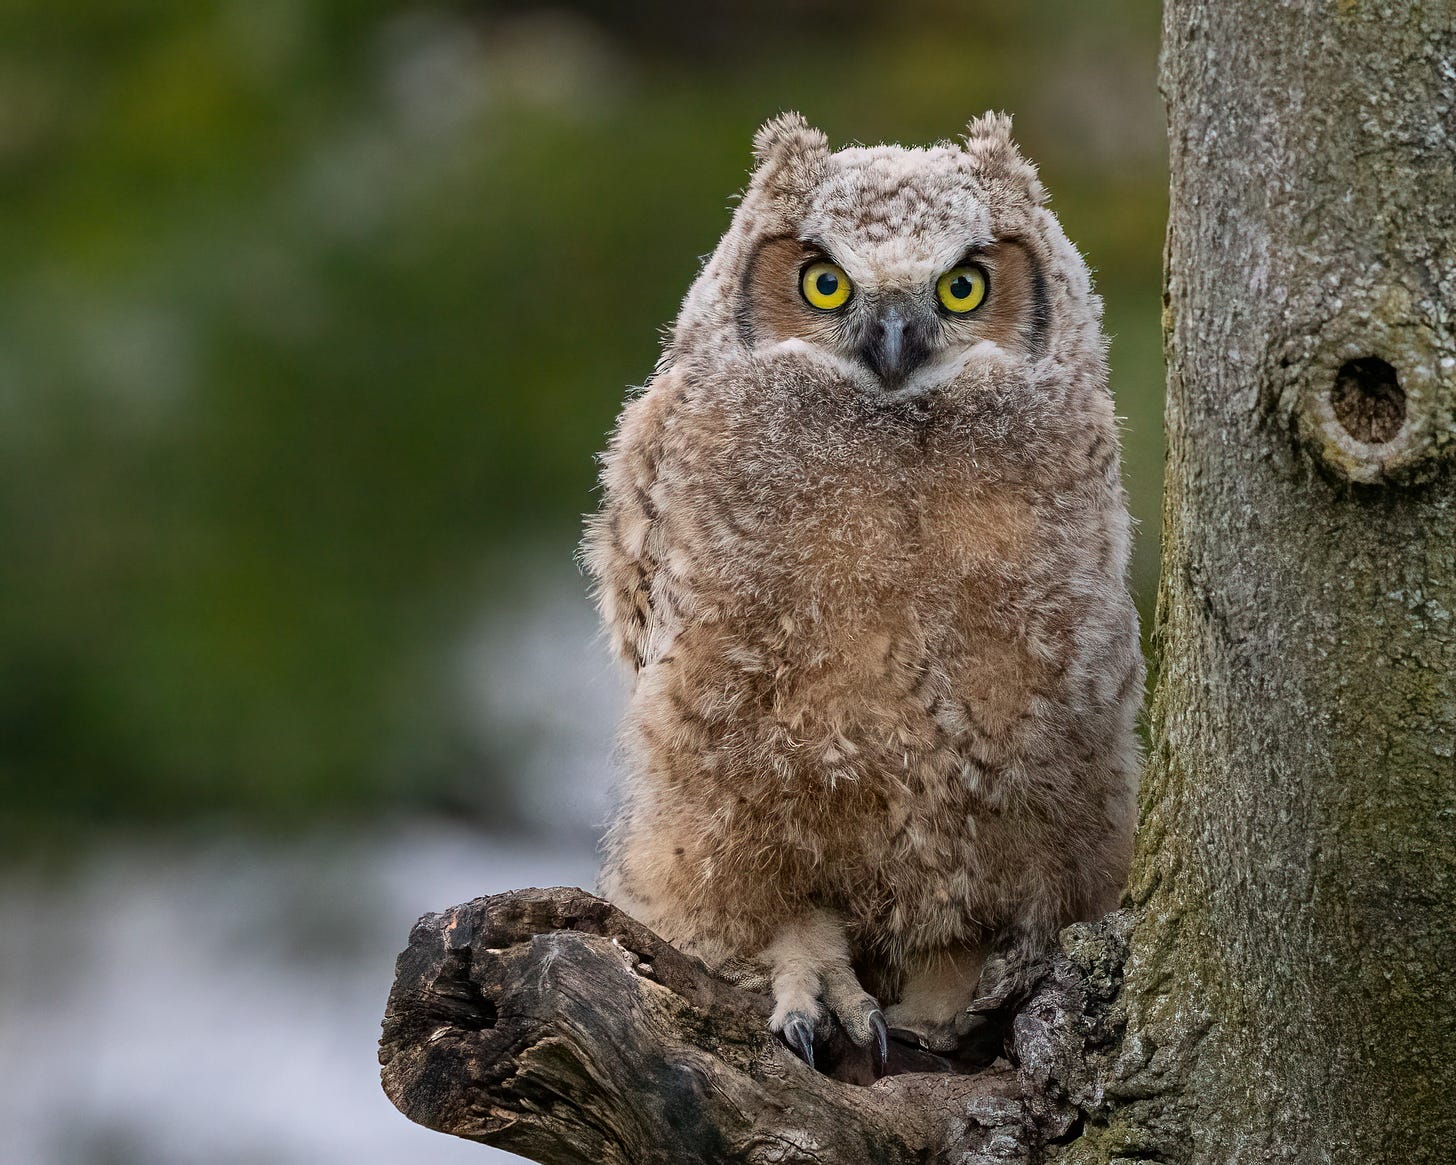 In this image, the fledgling owl is sitting on a branch next to the trunk of a large tree. The fledgling still has its fluffy feathers, but the disc face shape is starting to show around its eyes. It's so-called horns are fluffy feathers sticking up. In the subsequent images, a man's hands are shown holding the baby owl on the first day after it fell out of the nest. At that time, the owl was entirely white, fluffy feathers with disproportionately big feet with claws. The next image shows the plastic tub that the owl rescue team strapped to a nearby tree and filled with leaves and twigs. In the final image, the baby owl is shown laying in the bottom of the tub trying to hide.